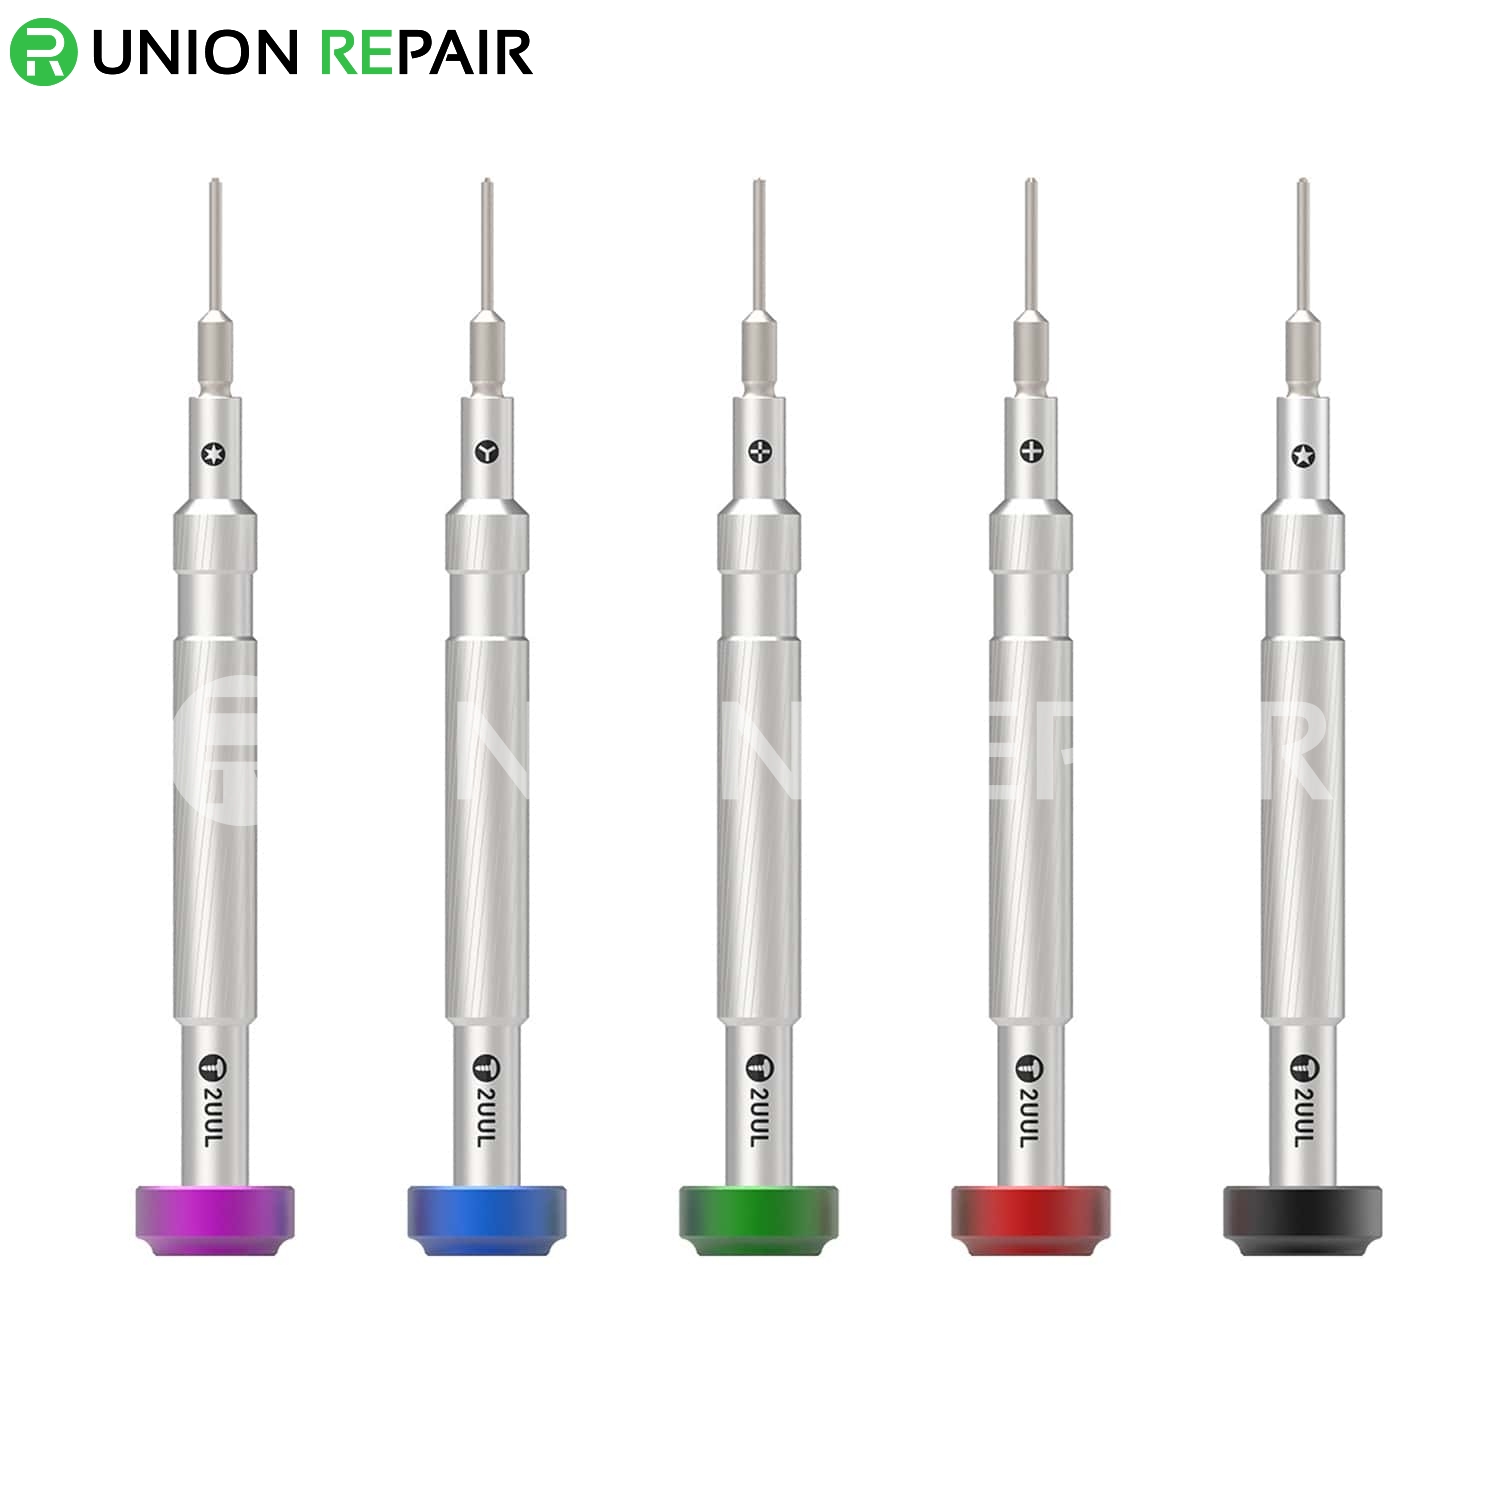 3D SCREW DRIVERS FOR iPhones Samsung And Huawei Phones 